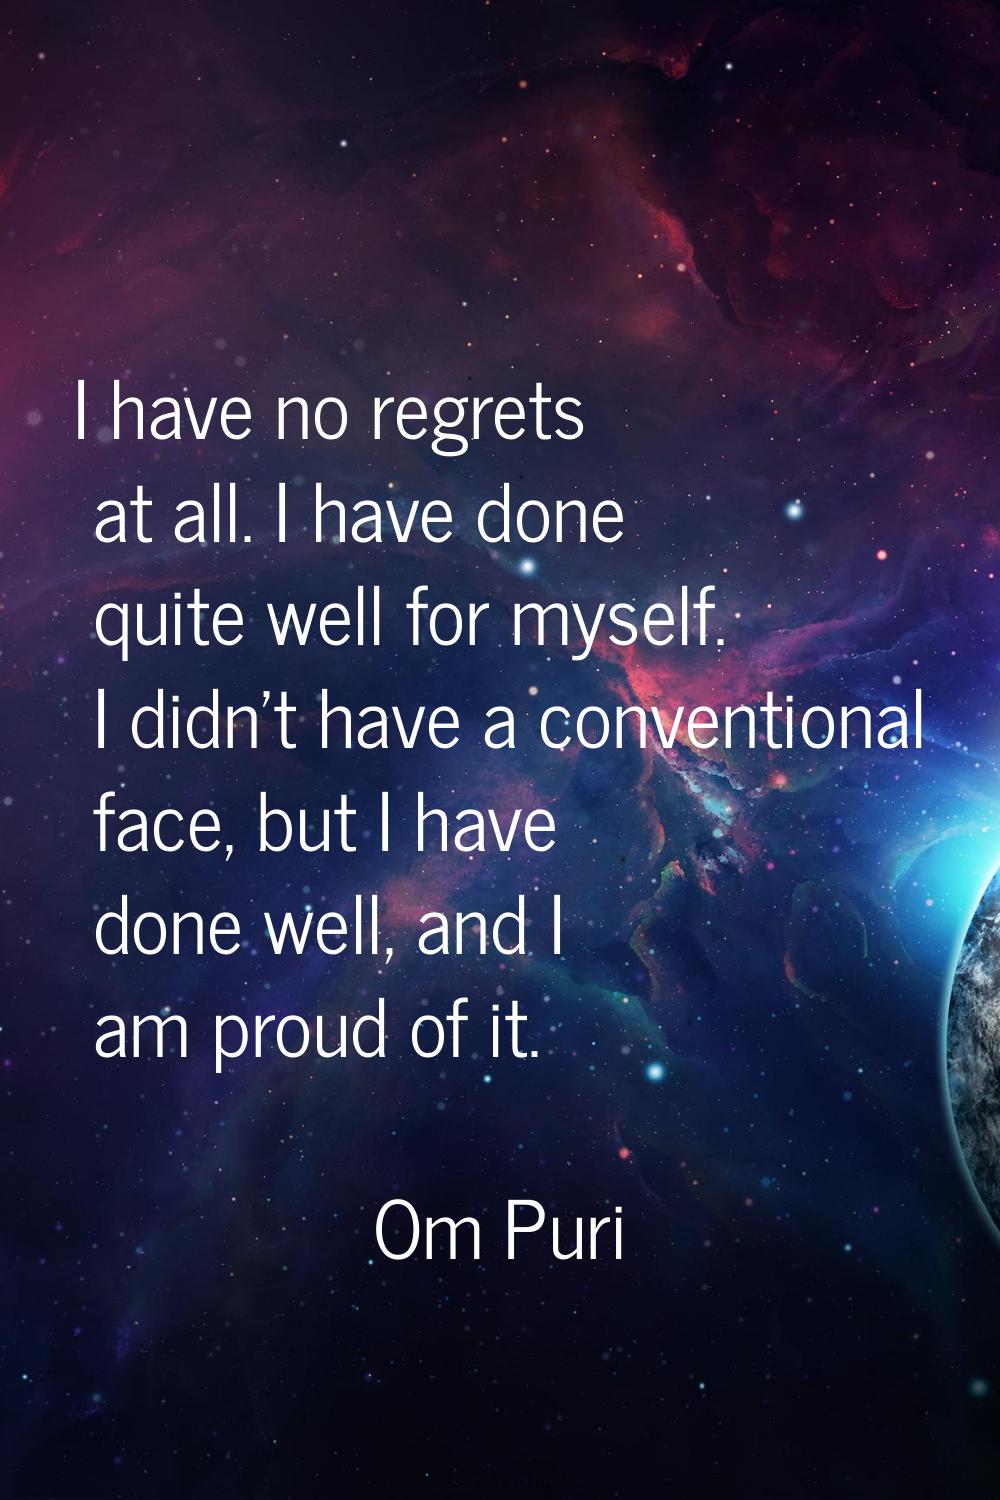 I have no regrets at all. I have done quite well for myself. I didn't have a conventional face, but